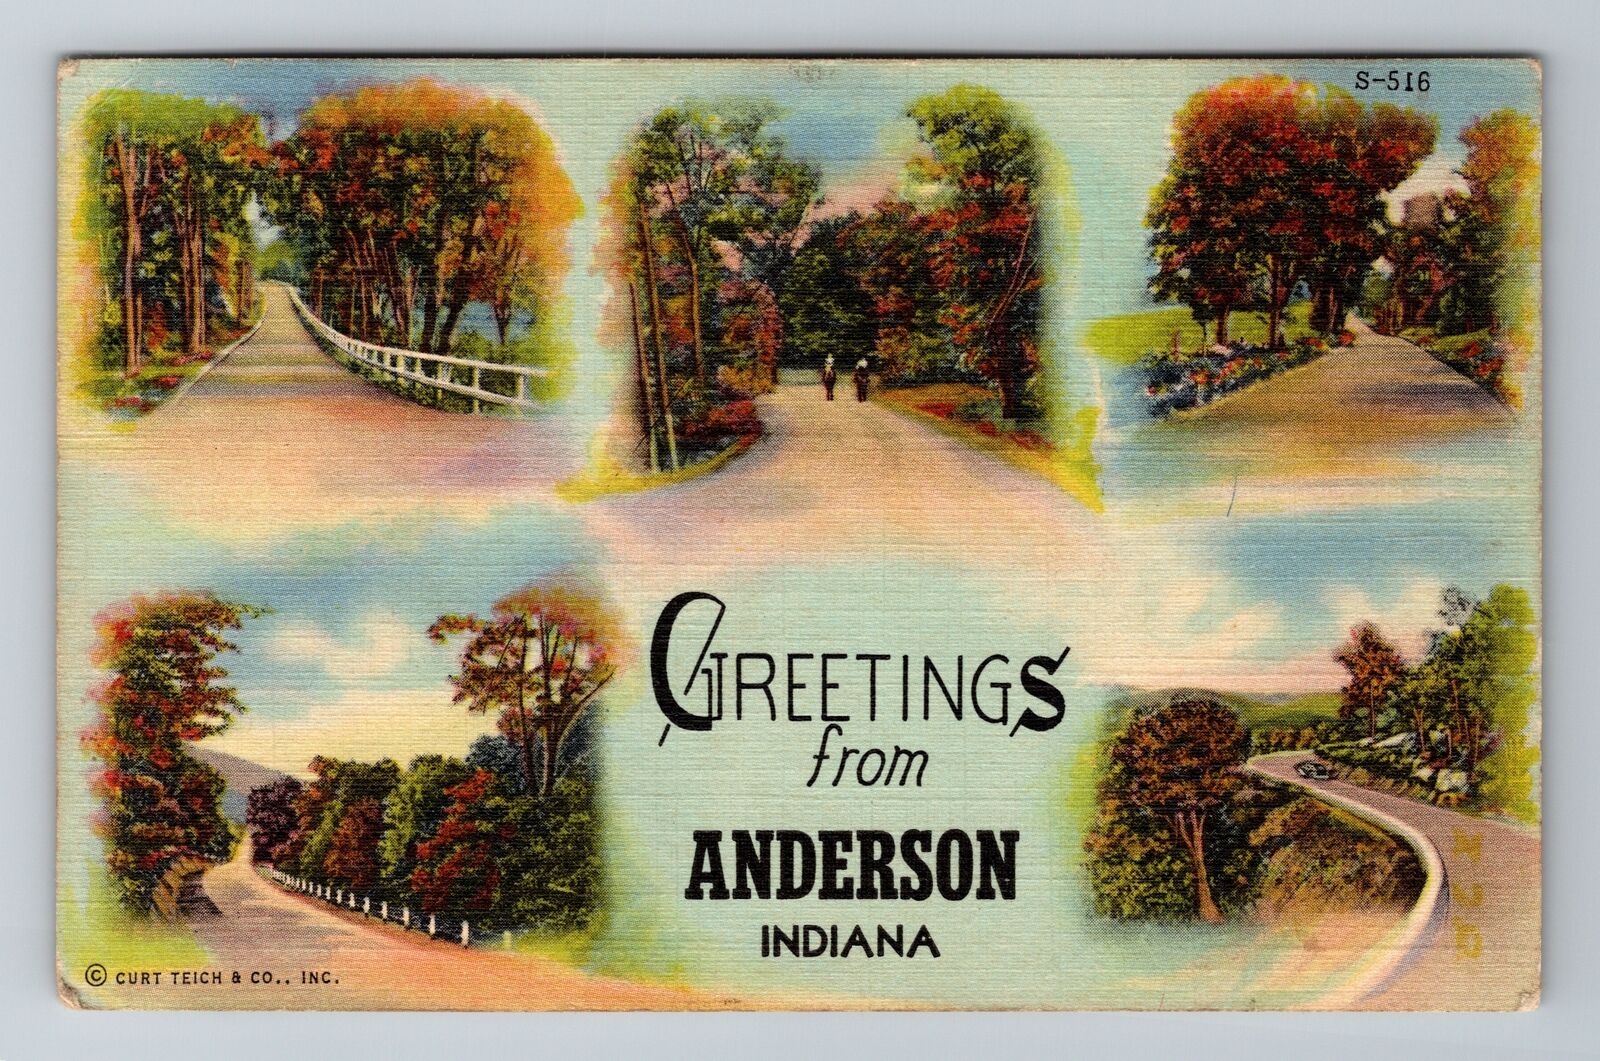 Anderson IN-Indiana, General Greetings, Scenic Roads, Antique, Vintage Postcard